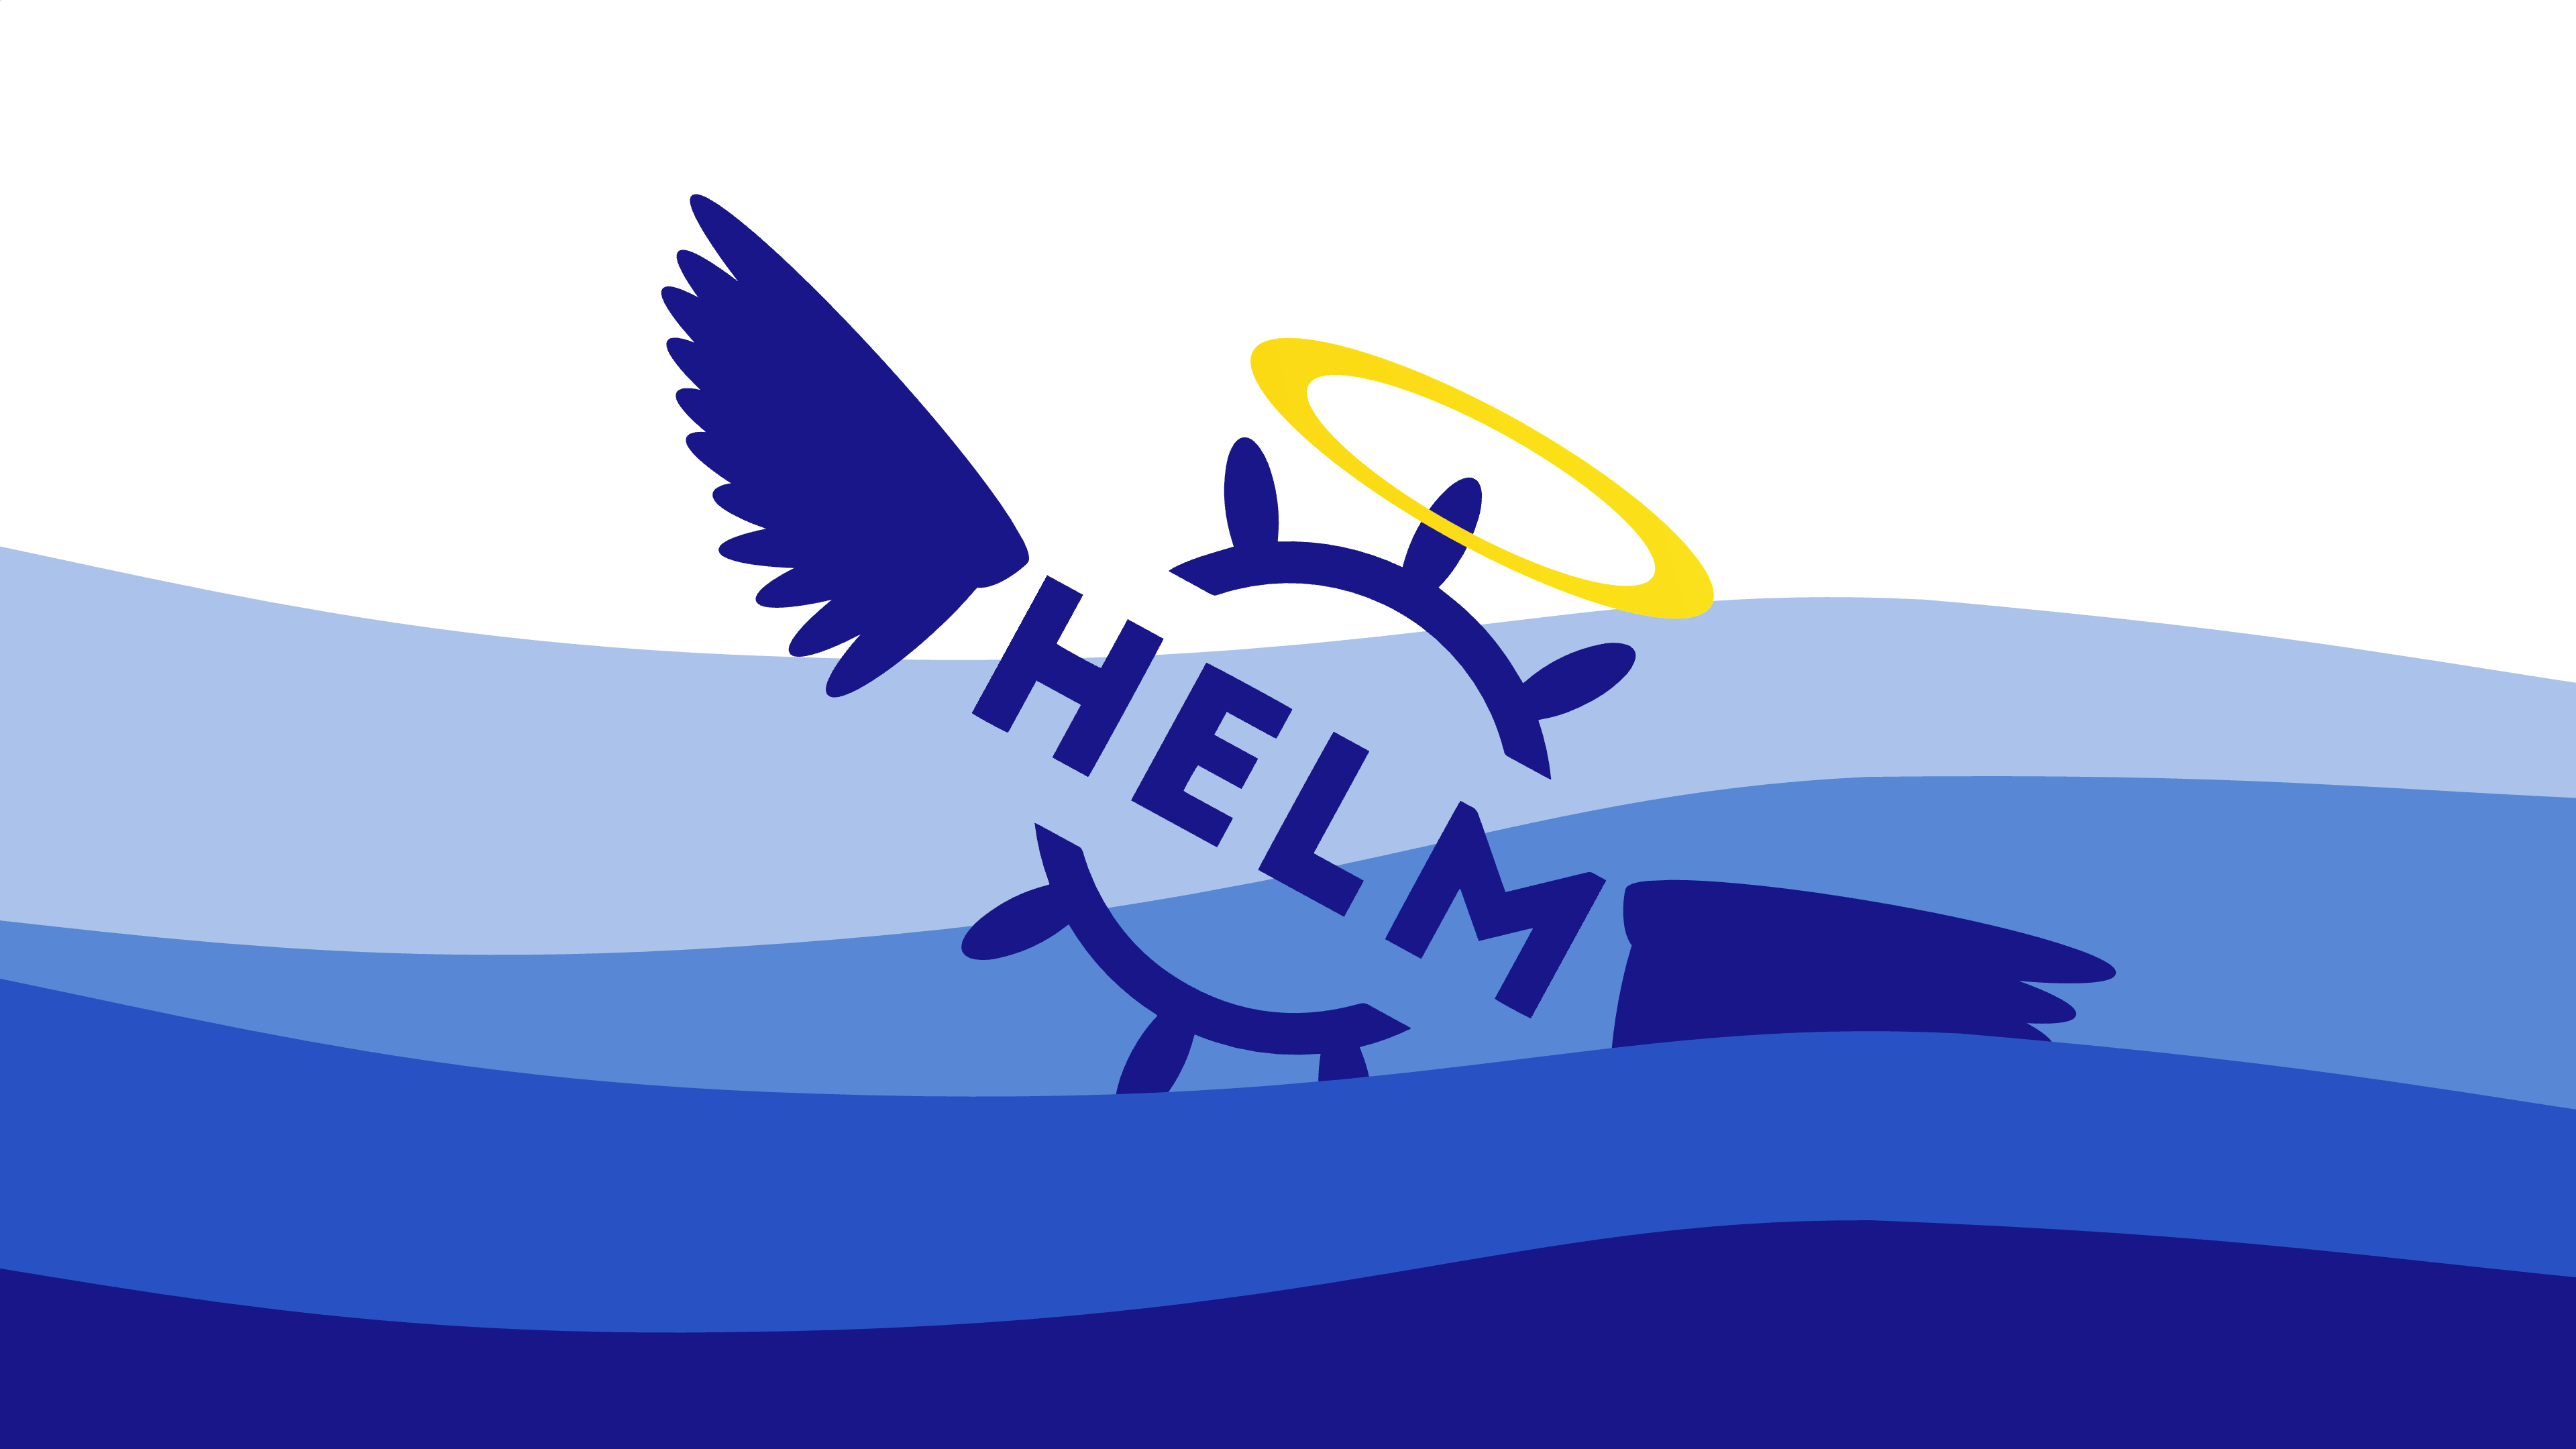 Helm logo with halo and angel wings, partially submersed in water.